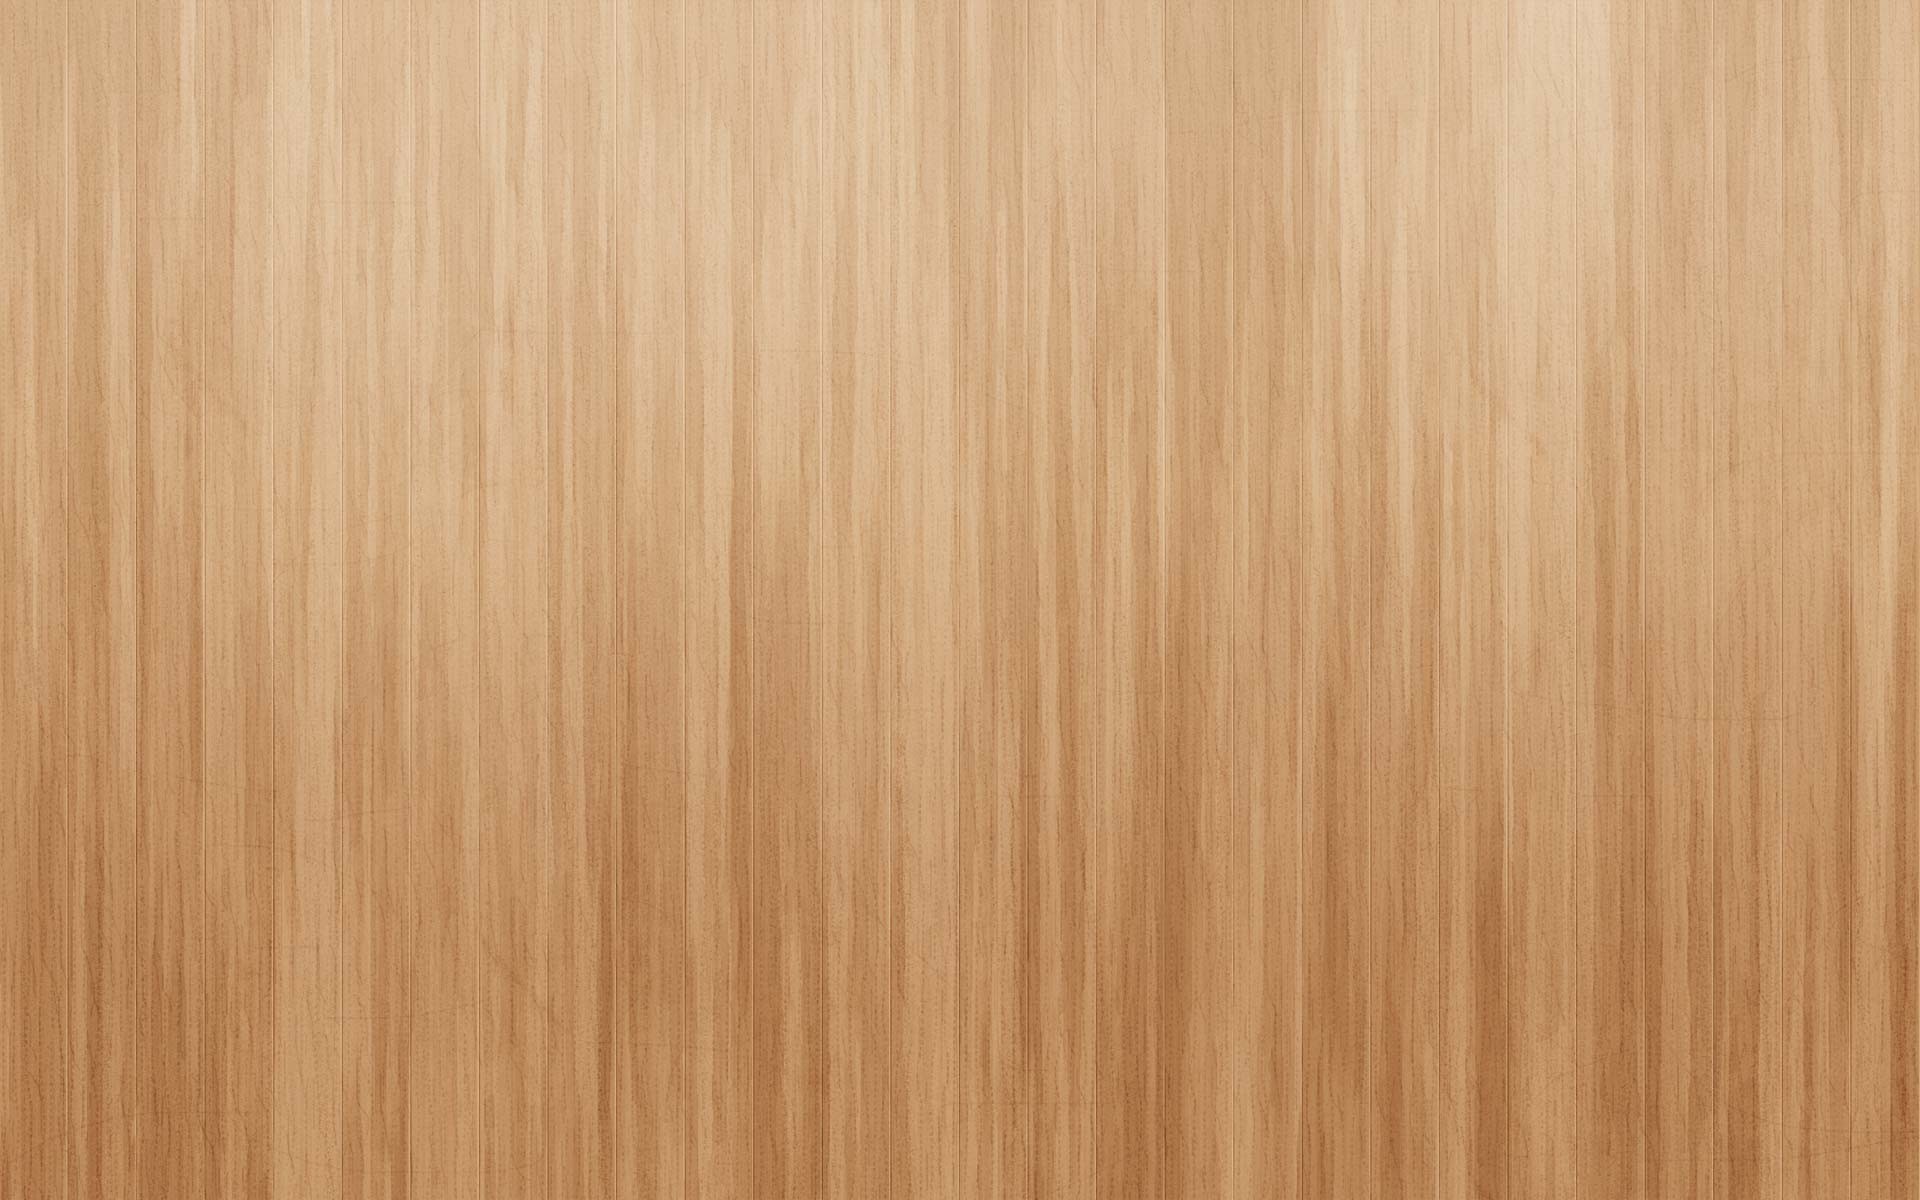  Wood  Grain  background    Download free  awesome High 